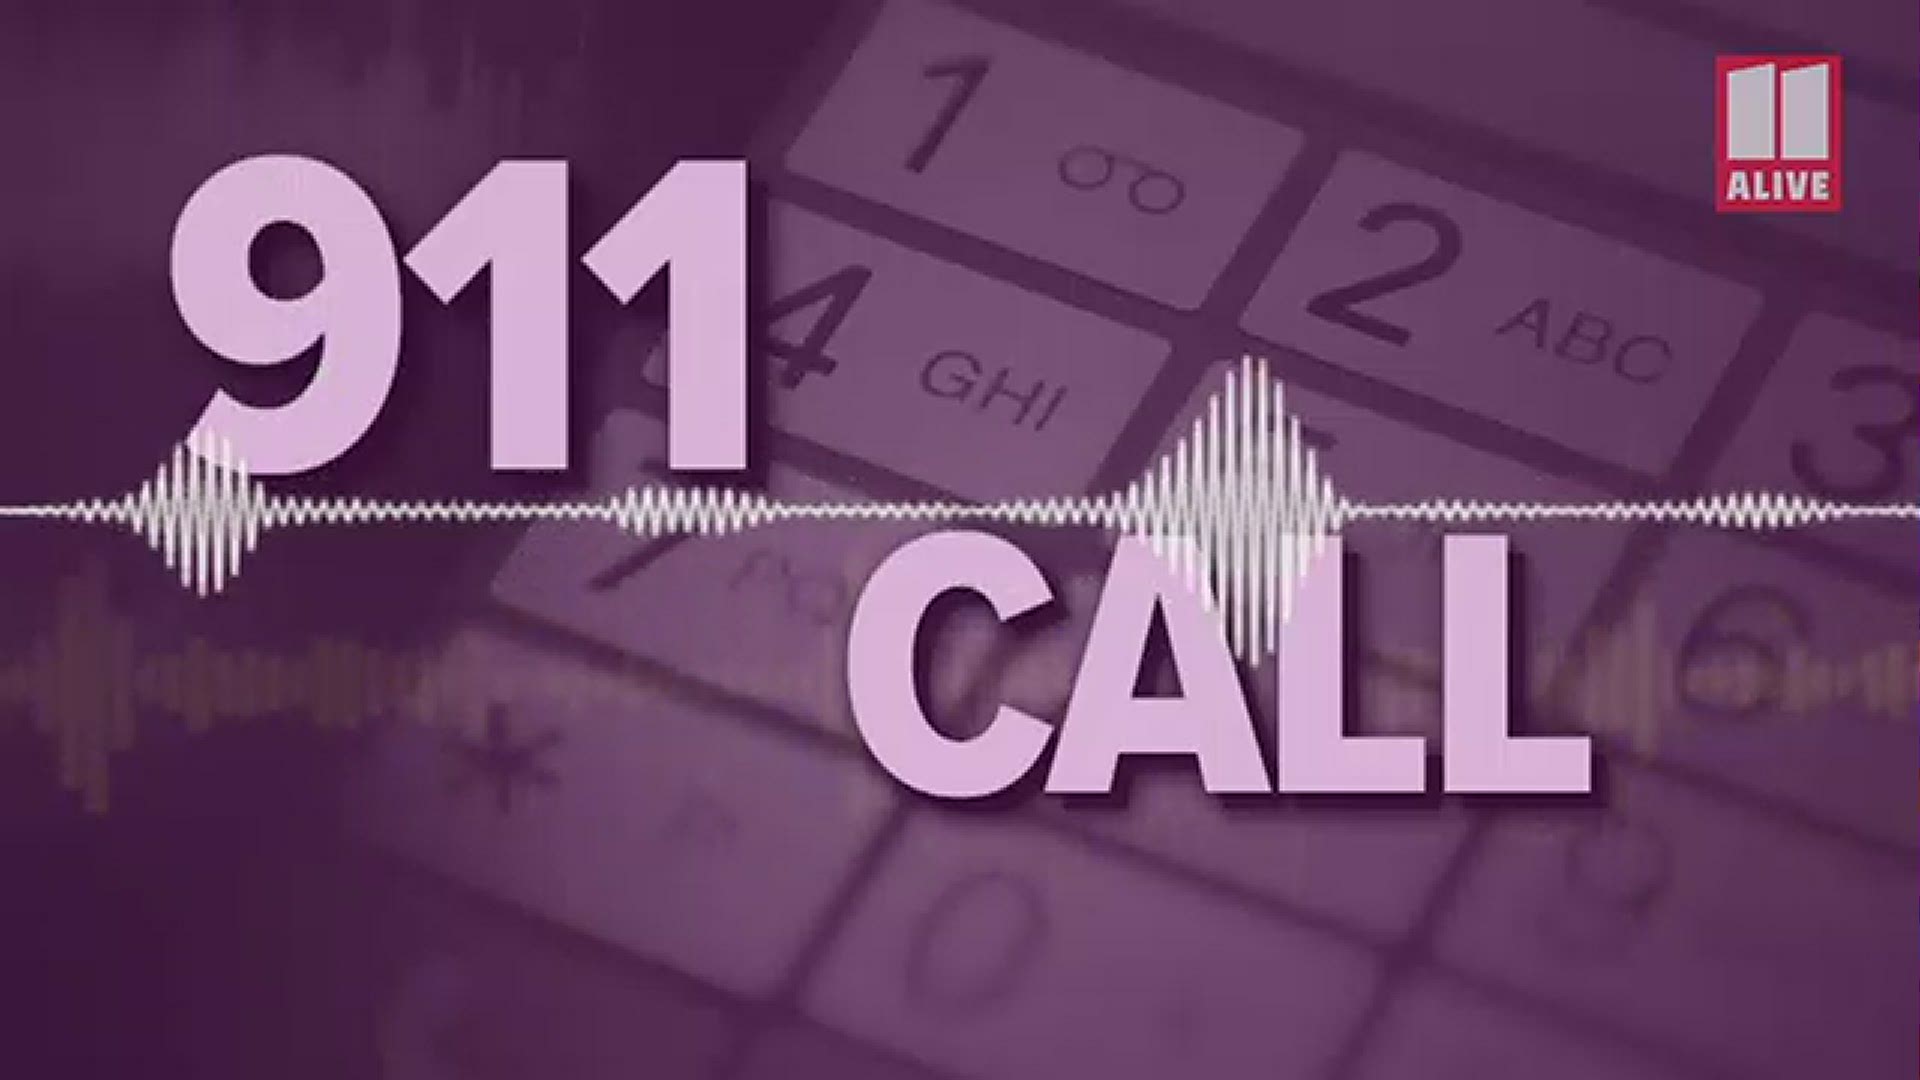 11Alive obtained two 911 calls in the Ahmaud Arbery case. The first one you hear a caller talk about recent break-ins, the second one you a caller shouting.